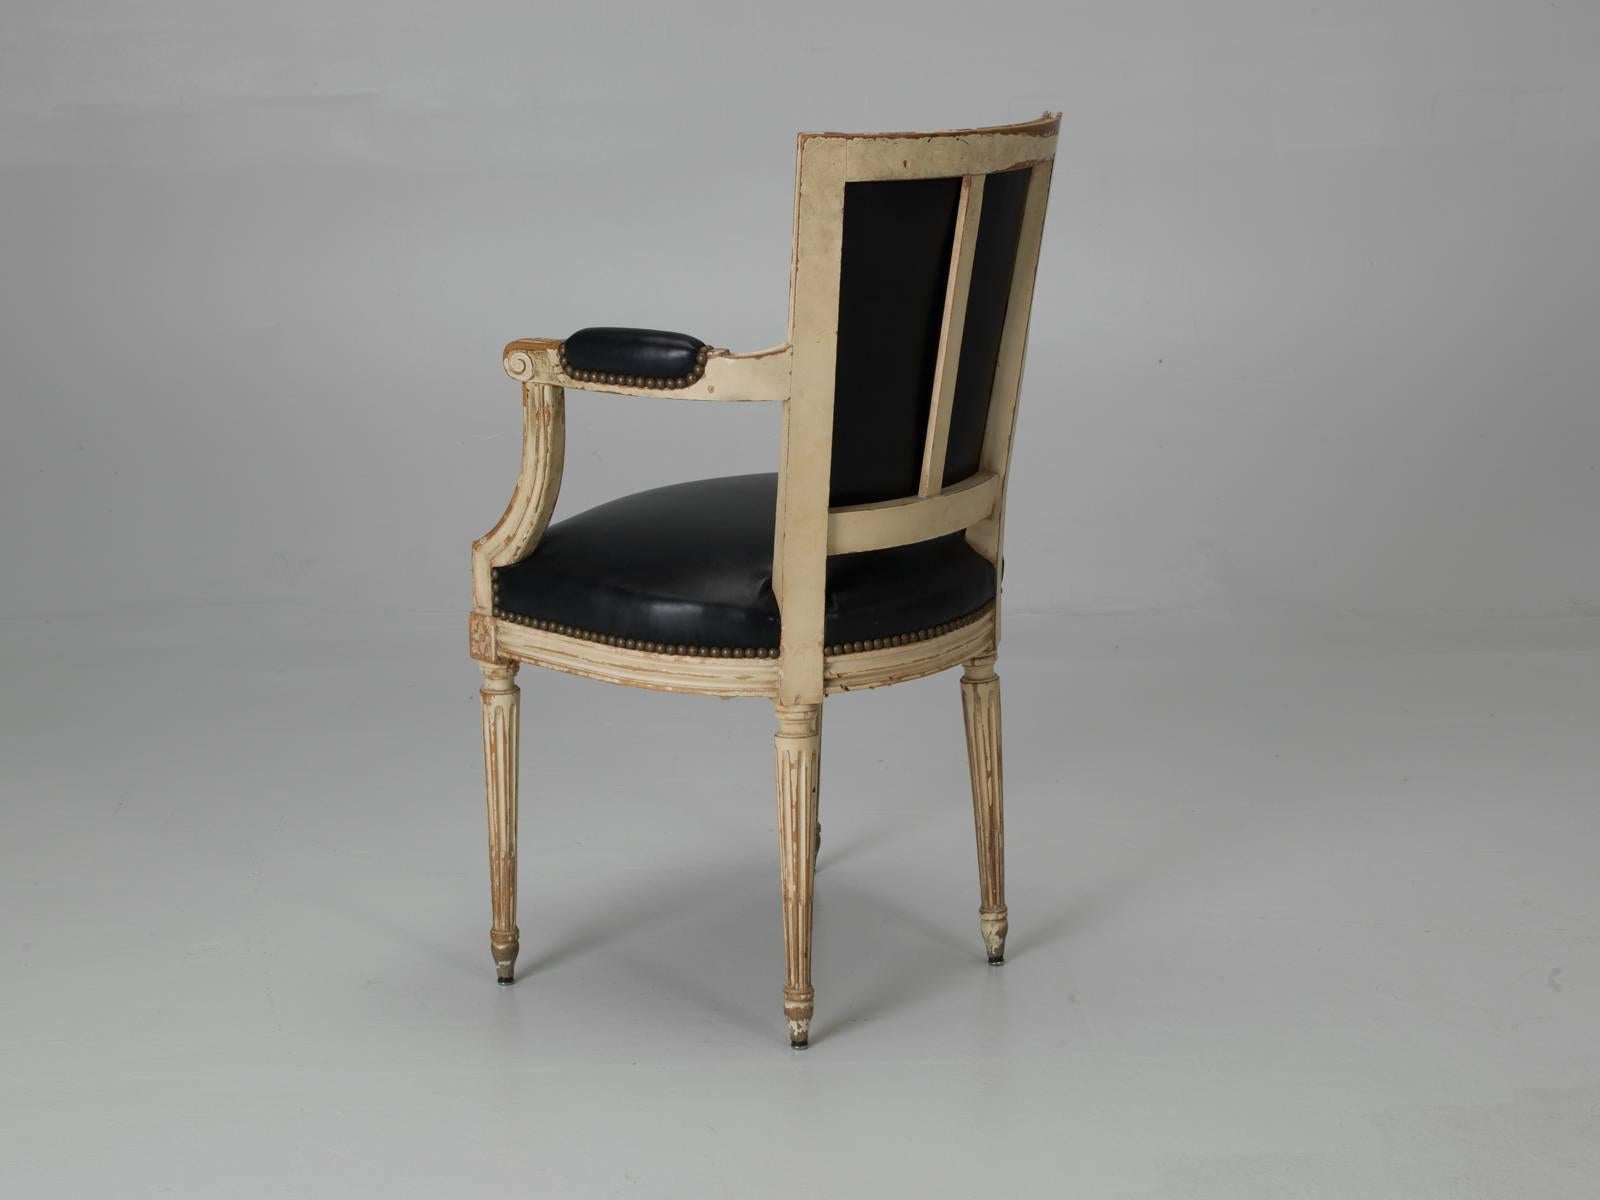 Early 20th Century Antique Louis XVI Style French Dining Chairs in Original Paint and Black Leather